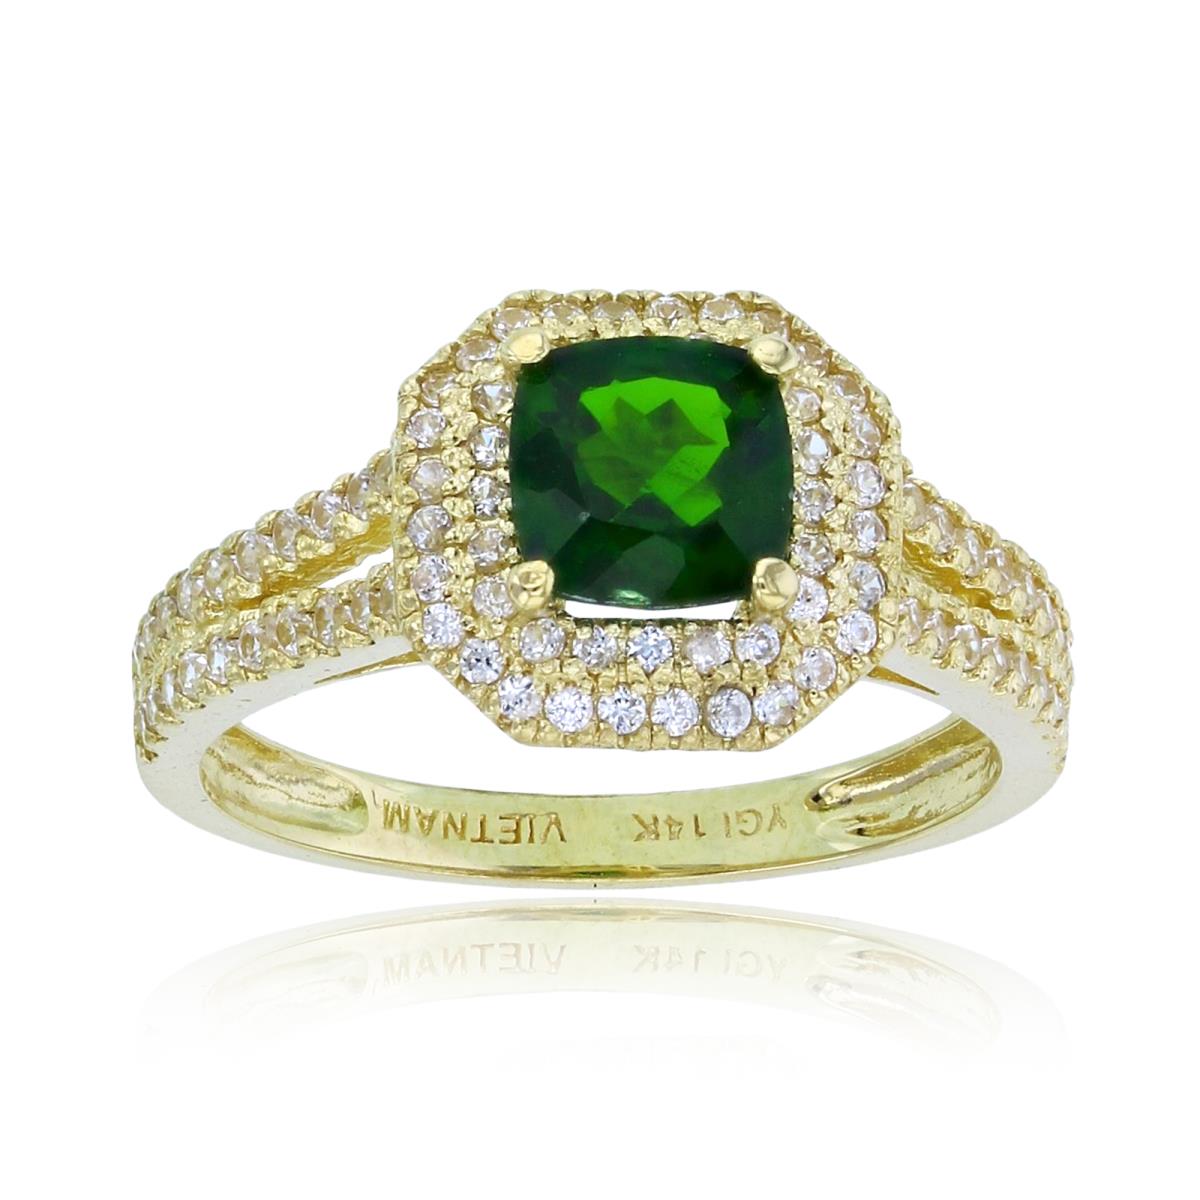 10K Yellow Gold 6mm Cush Chrom Diopside & Rnd Wh.Zircon Double Halo Ring